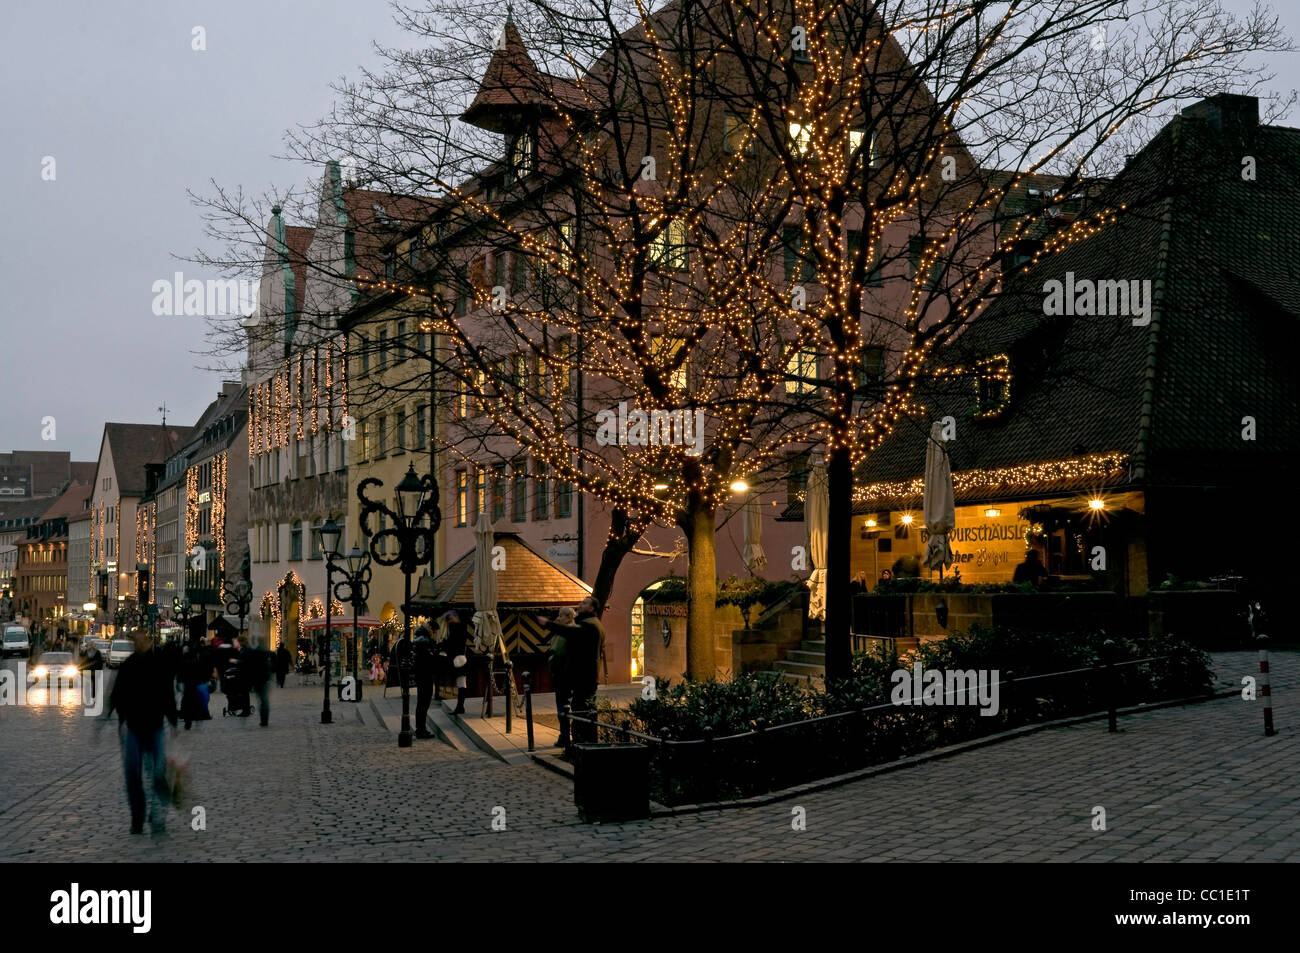 Christmas lights in the old town of Nuremberg, Franconia, Bavaria, Germany, Europe. Stock Photo